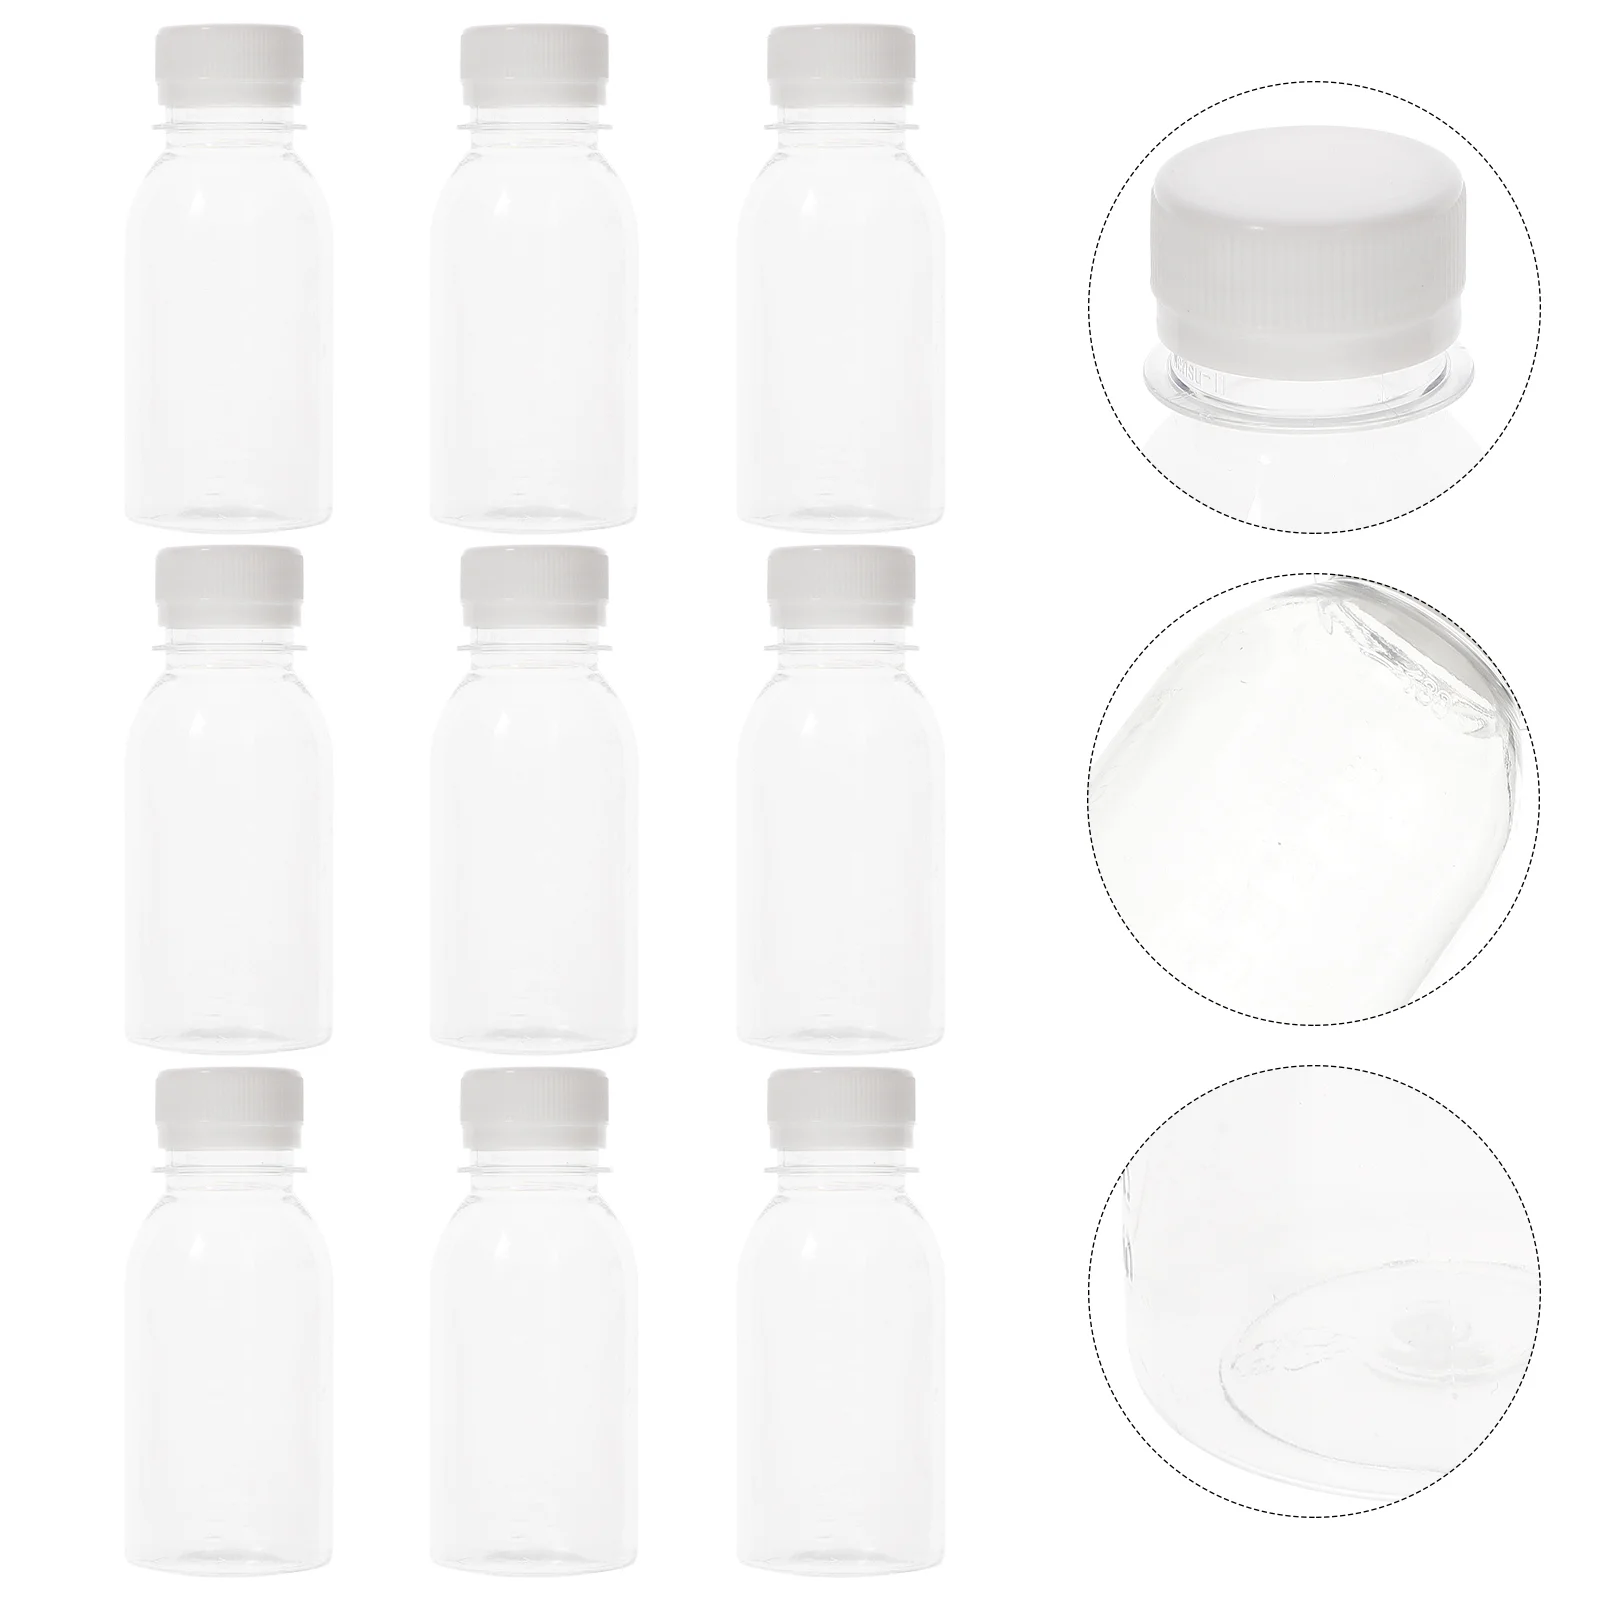 

Bottles Bottle Reusable Water Smoothie Empty Dressing Box Cup Shot Ginger Clear Salad Containers Beverage Caps Drink Sample